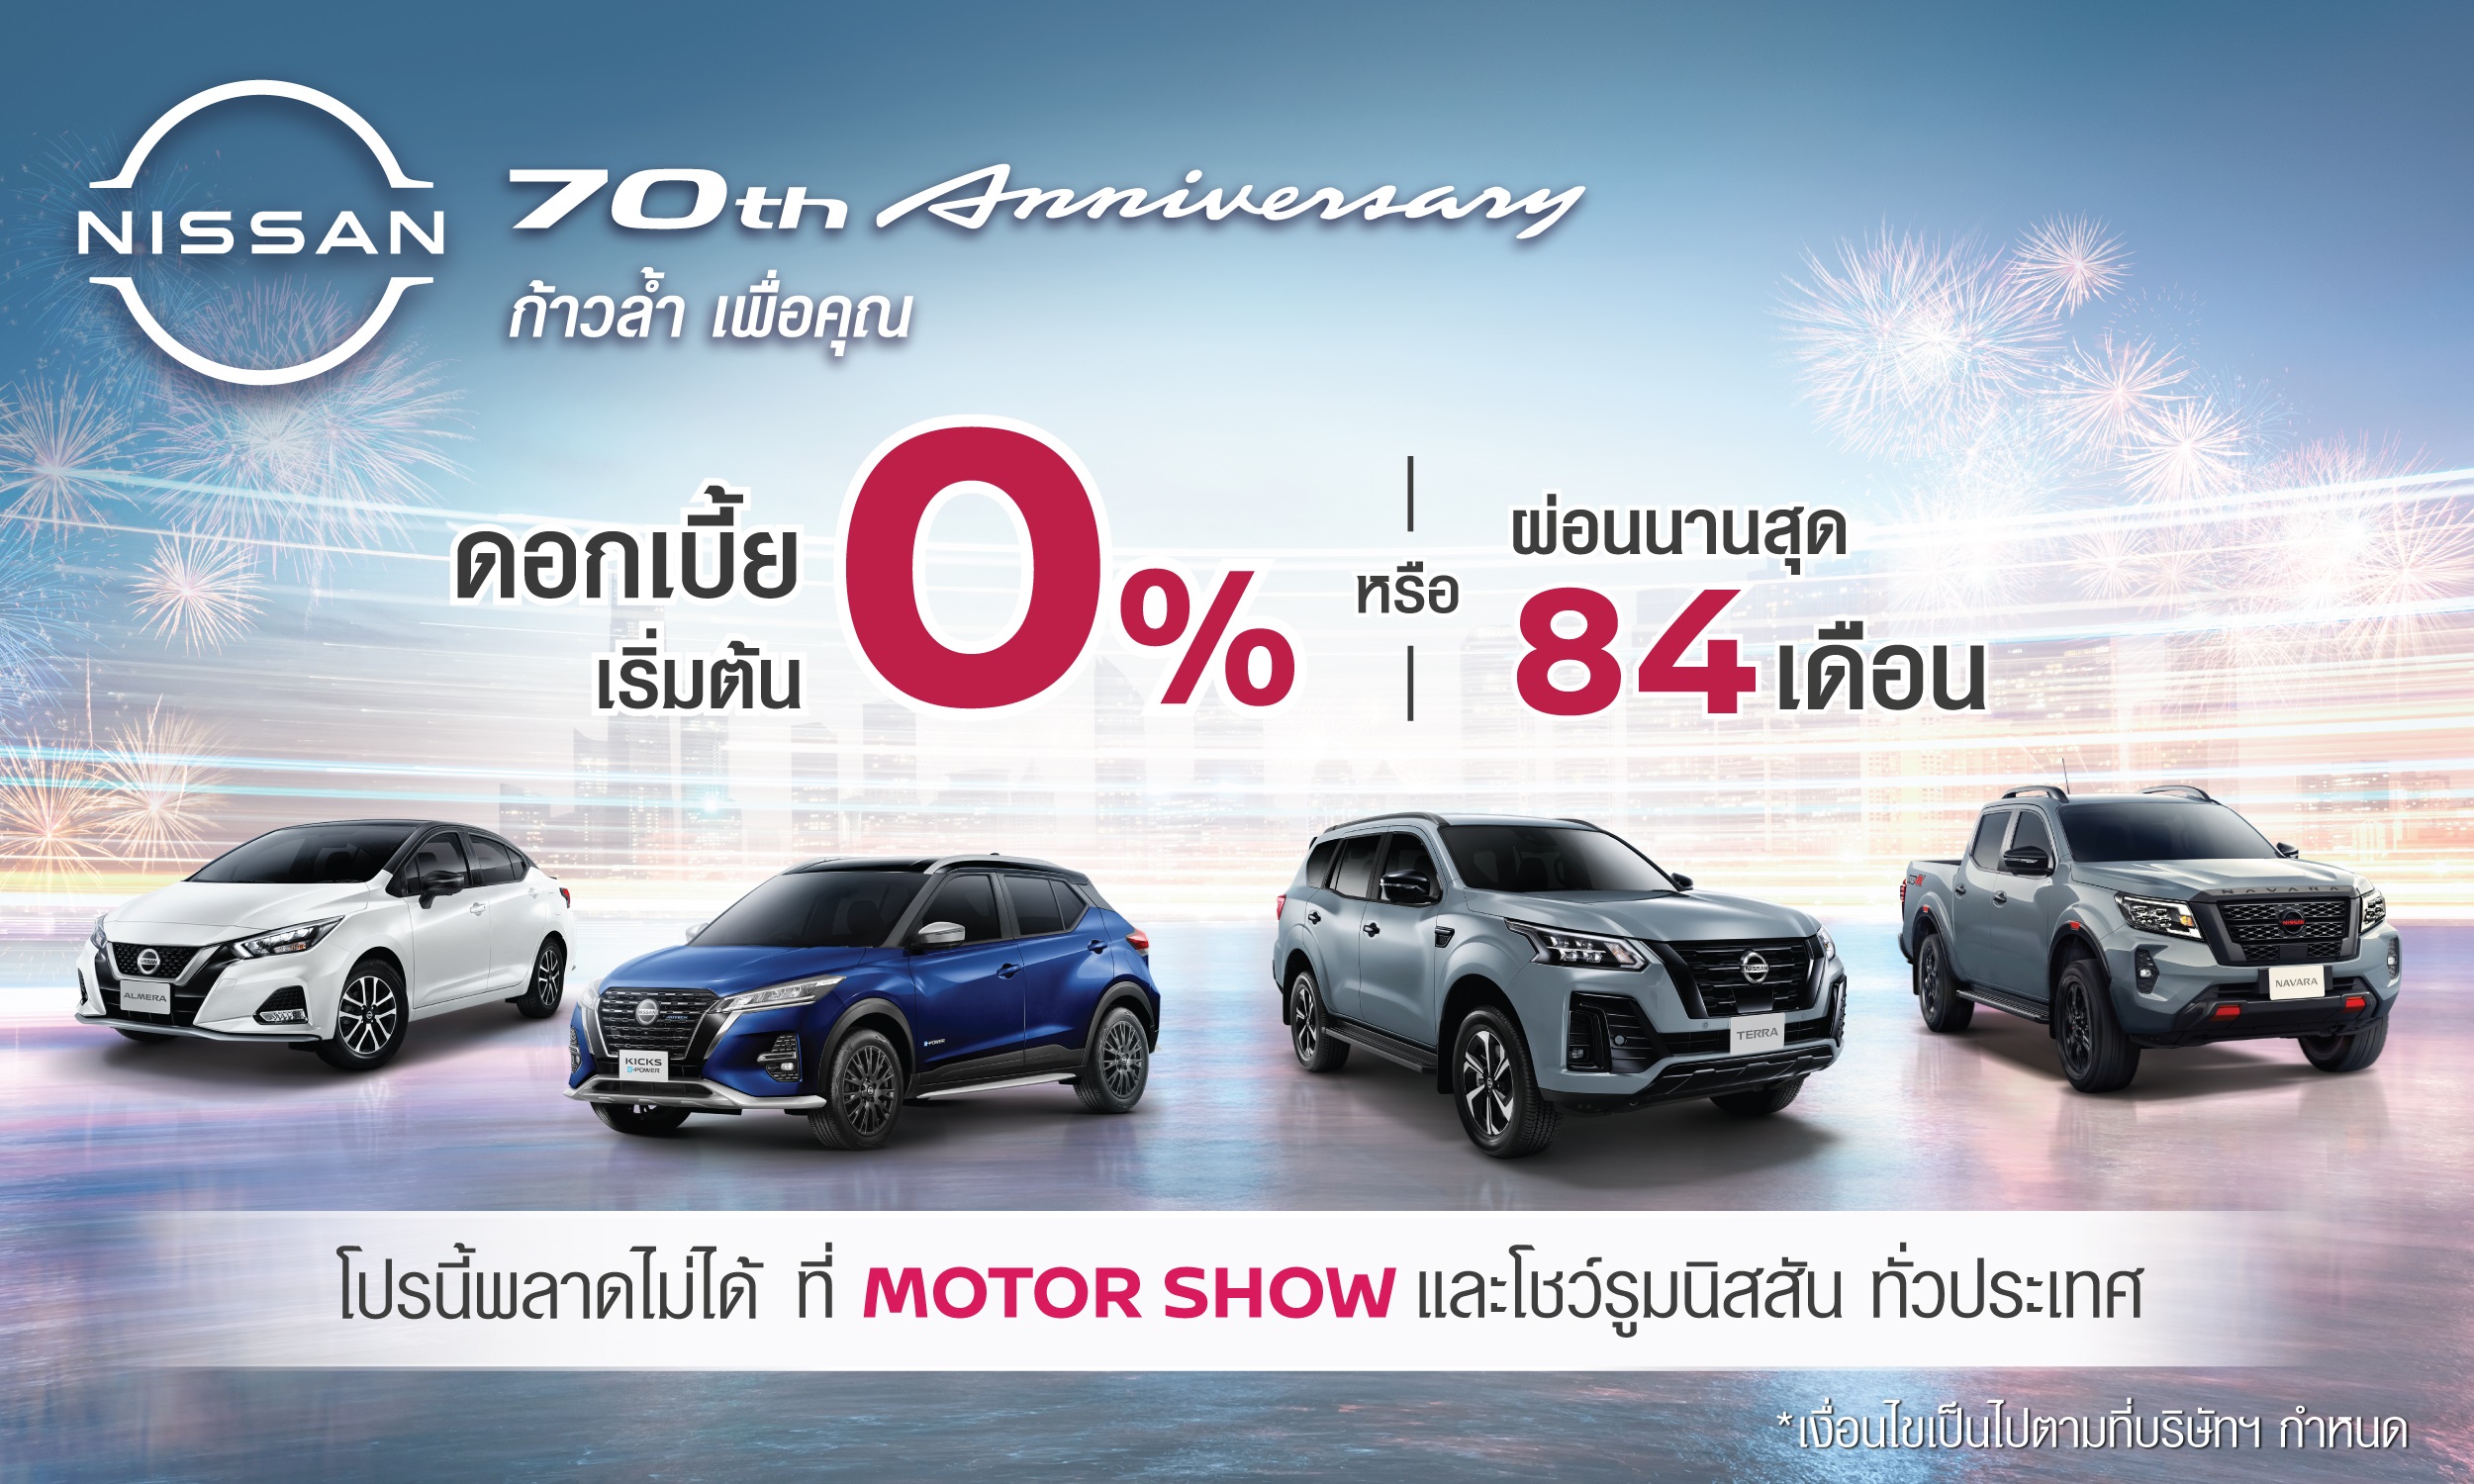 Nissan_Special Promotion